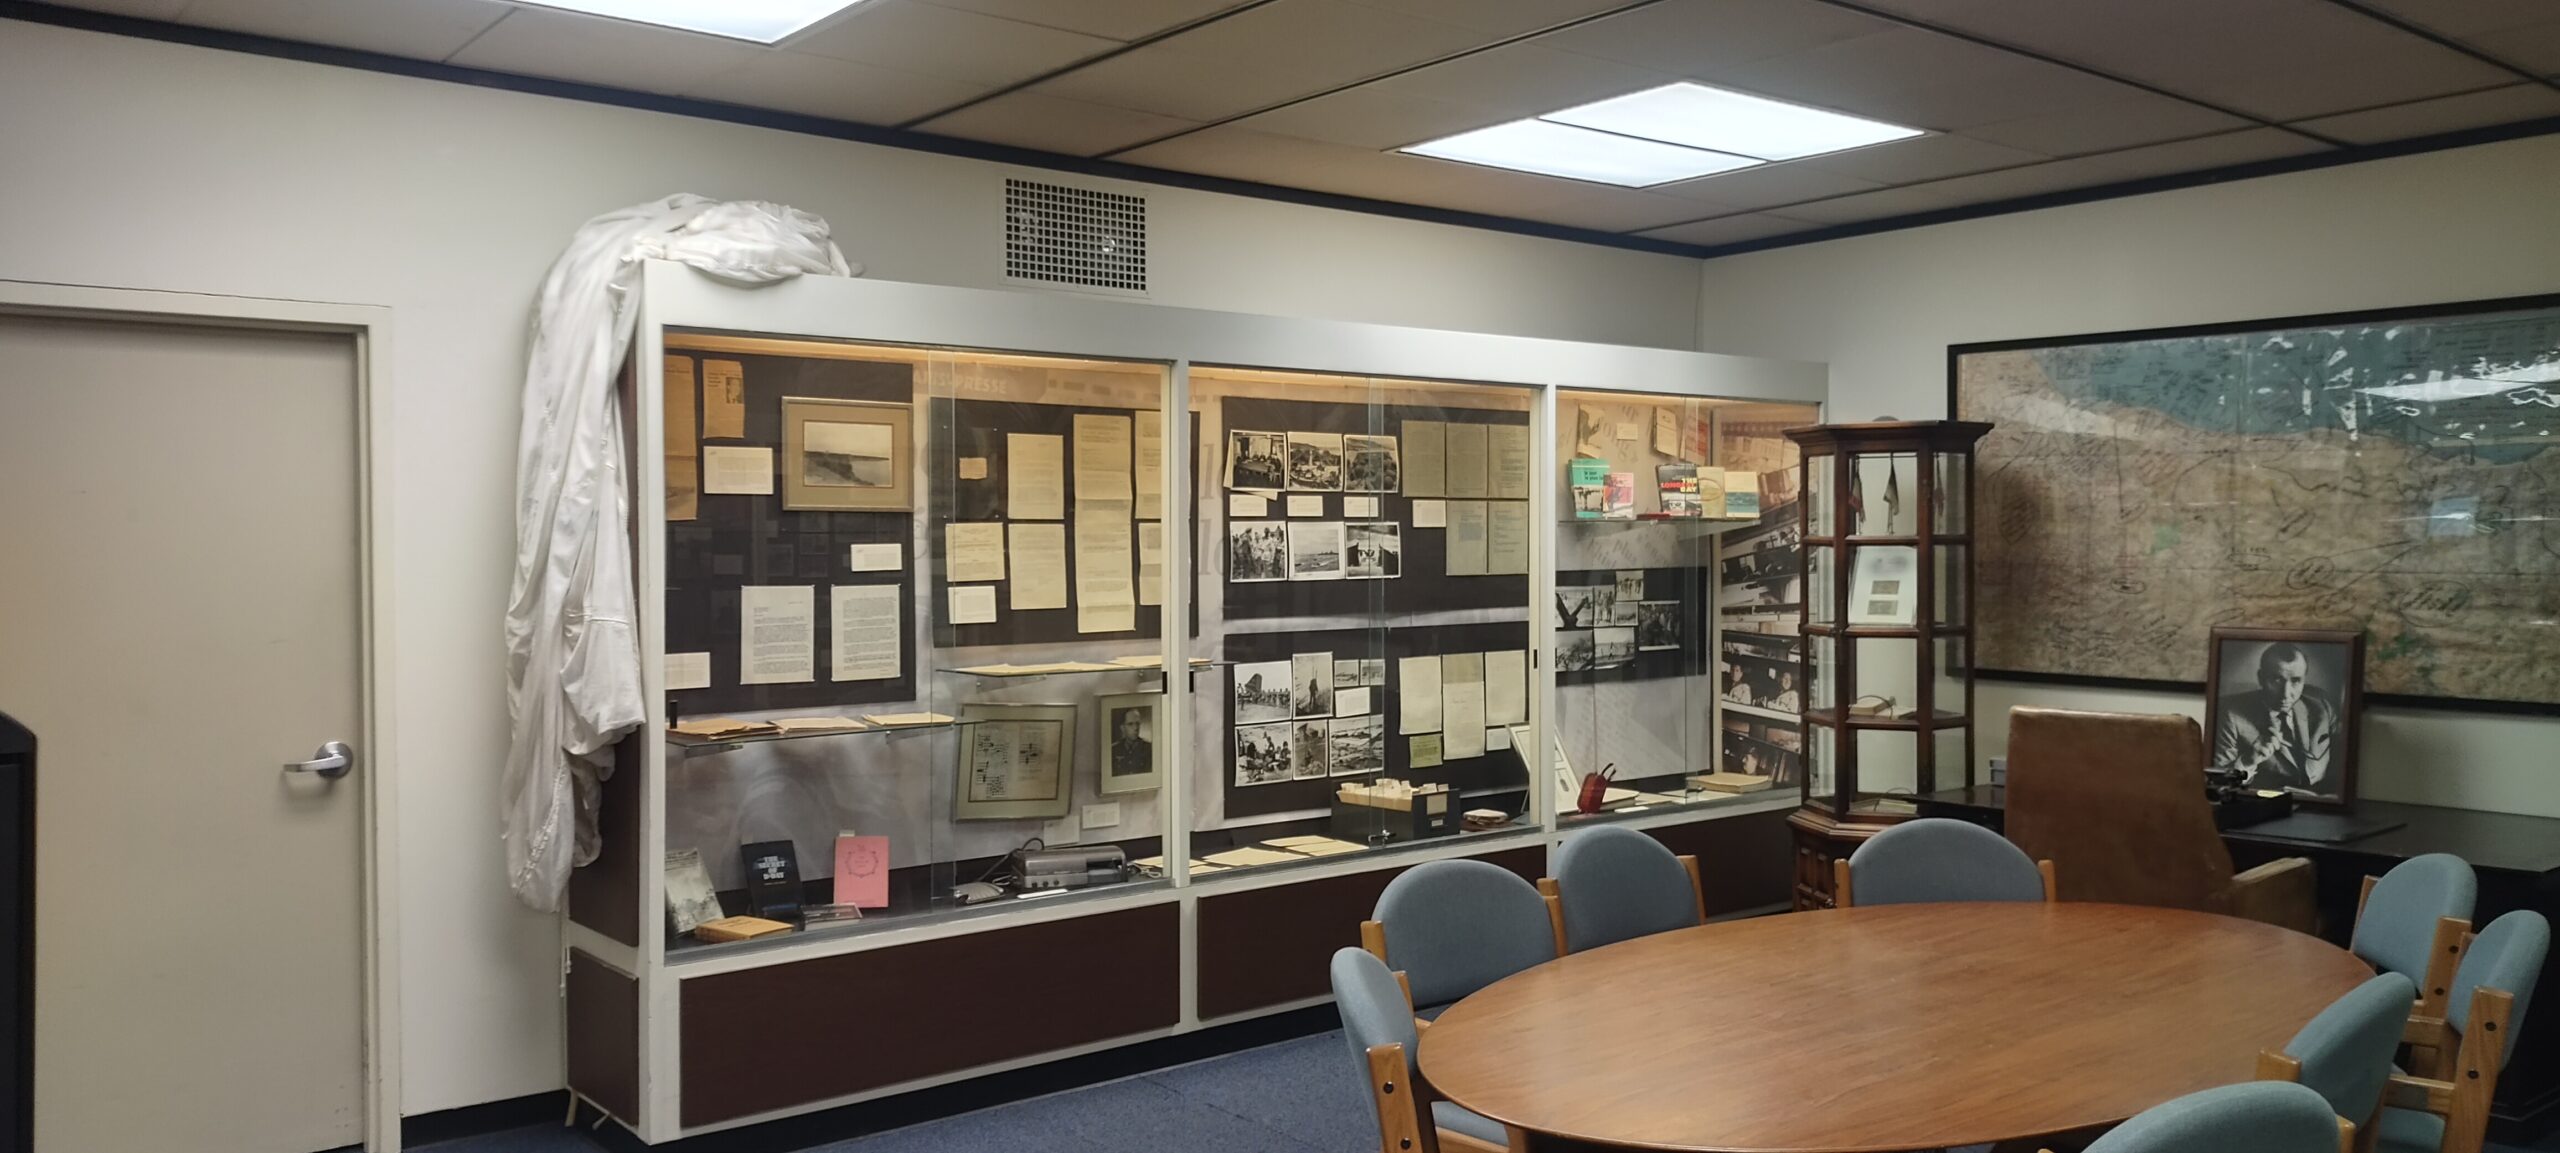 Updating an Archives Exhibit: The Ryan Room